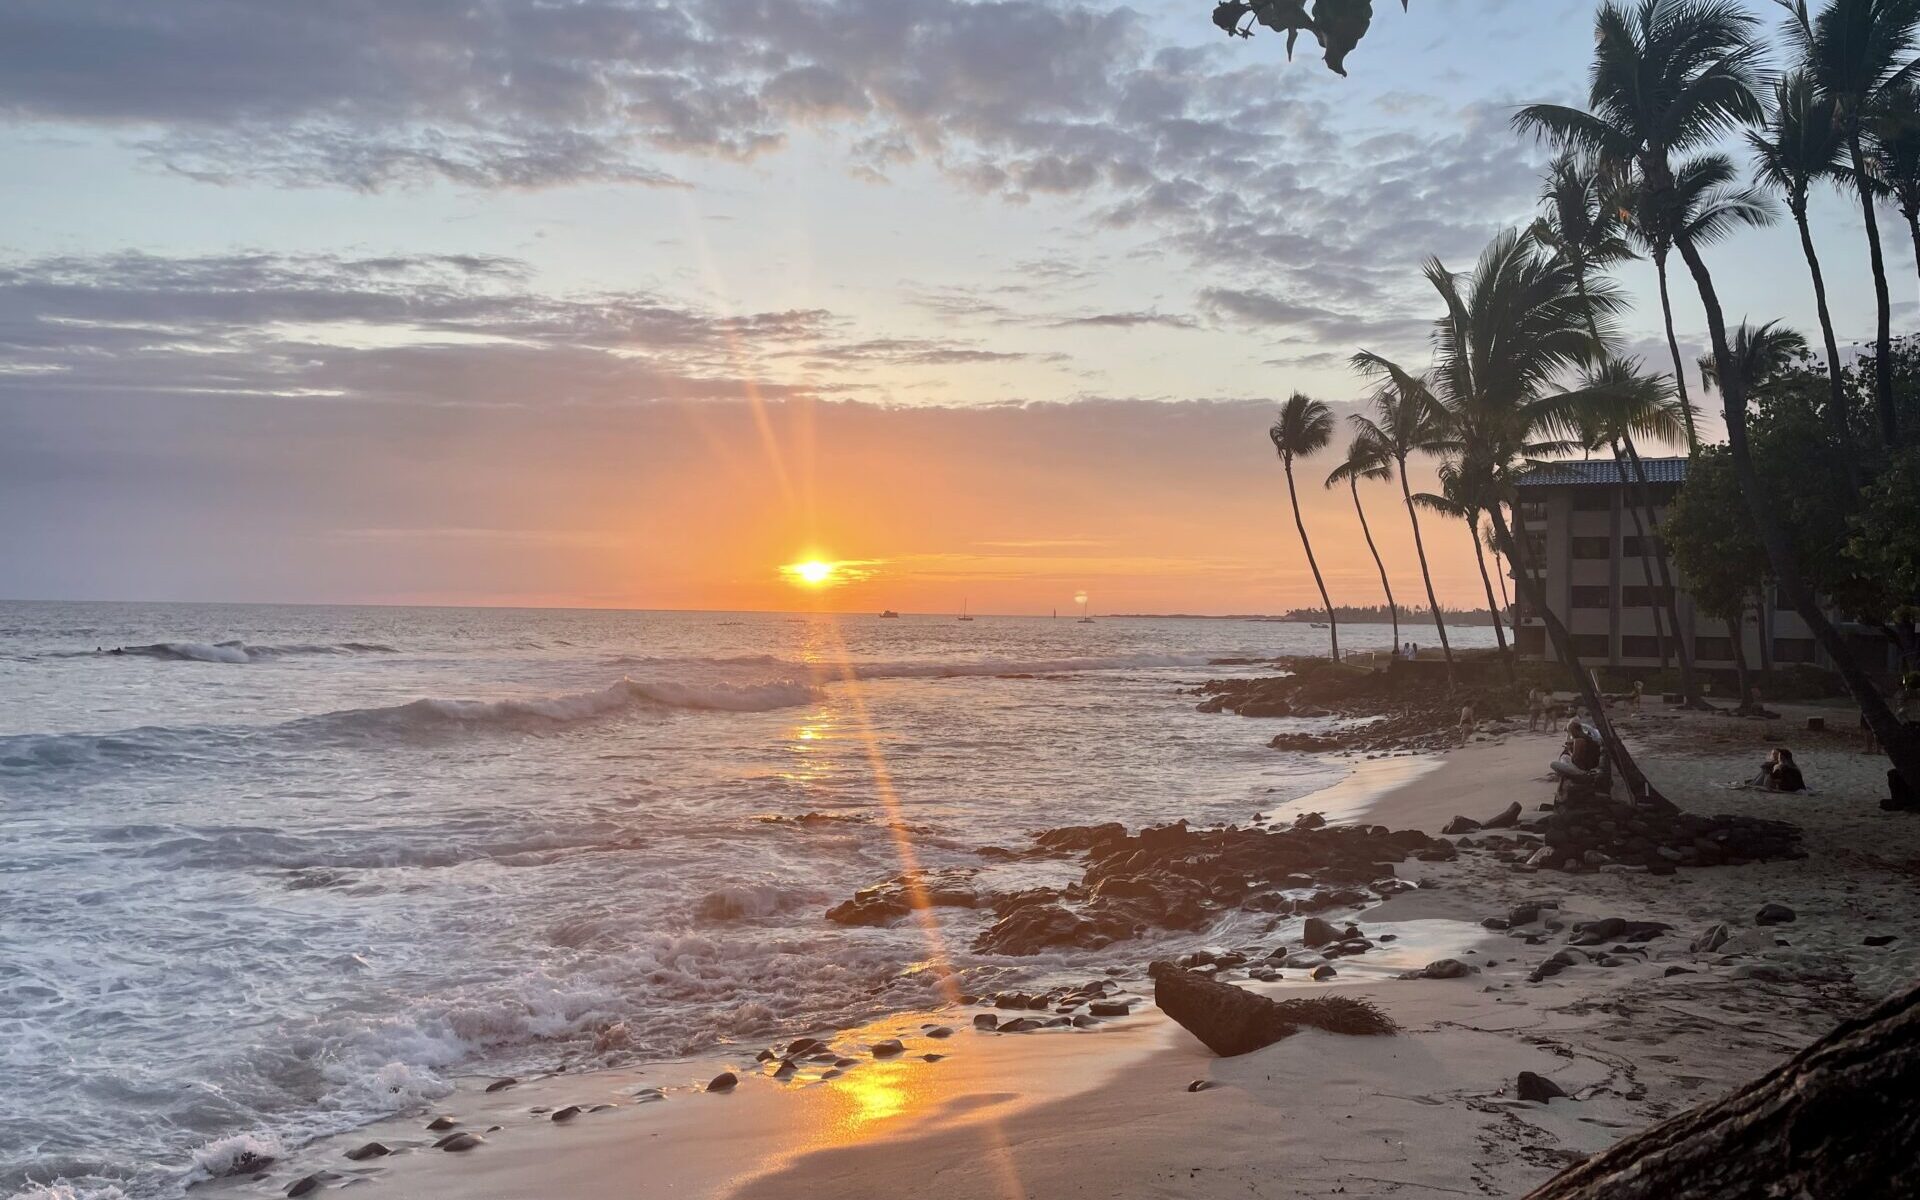 sunset from a beach in kona with palm trees blowing, best kona coffee, best kona coffee brands, kona sunset